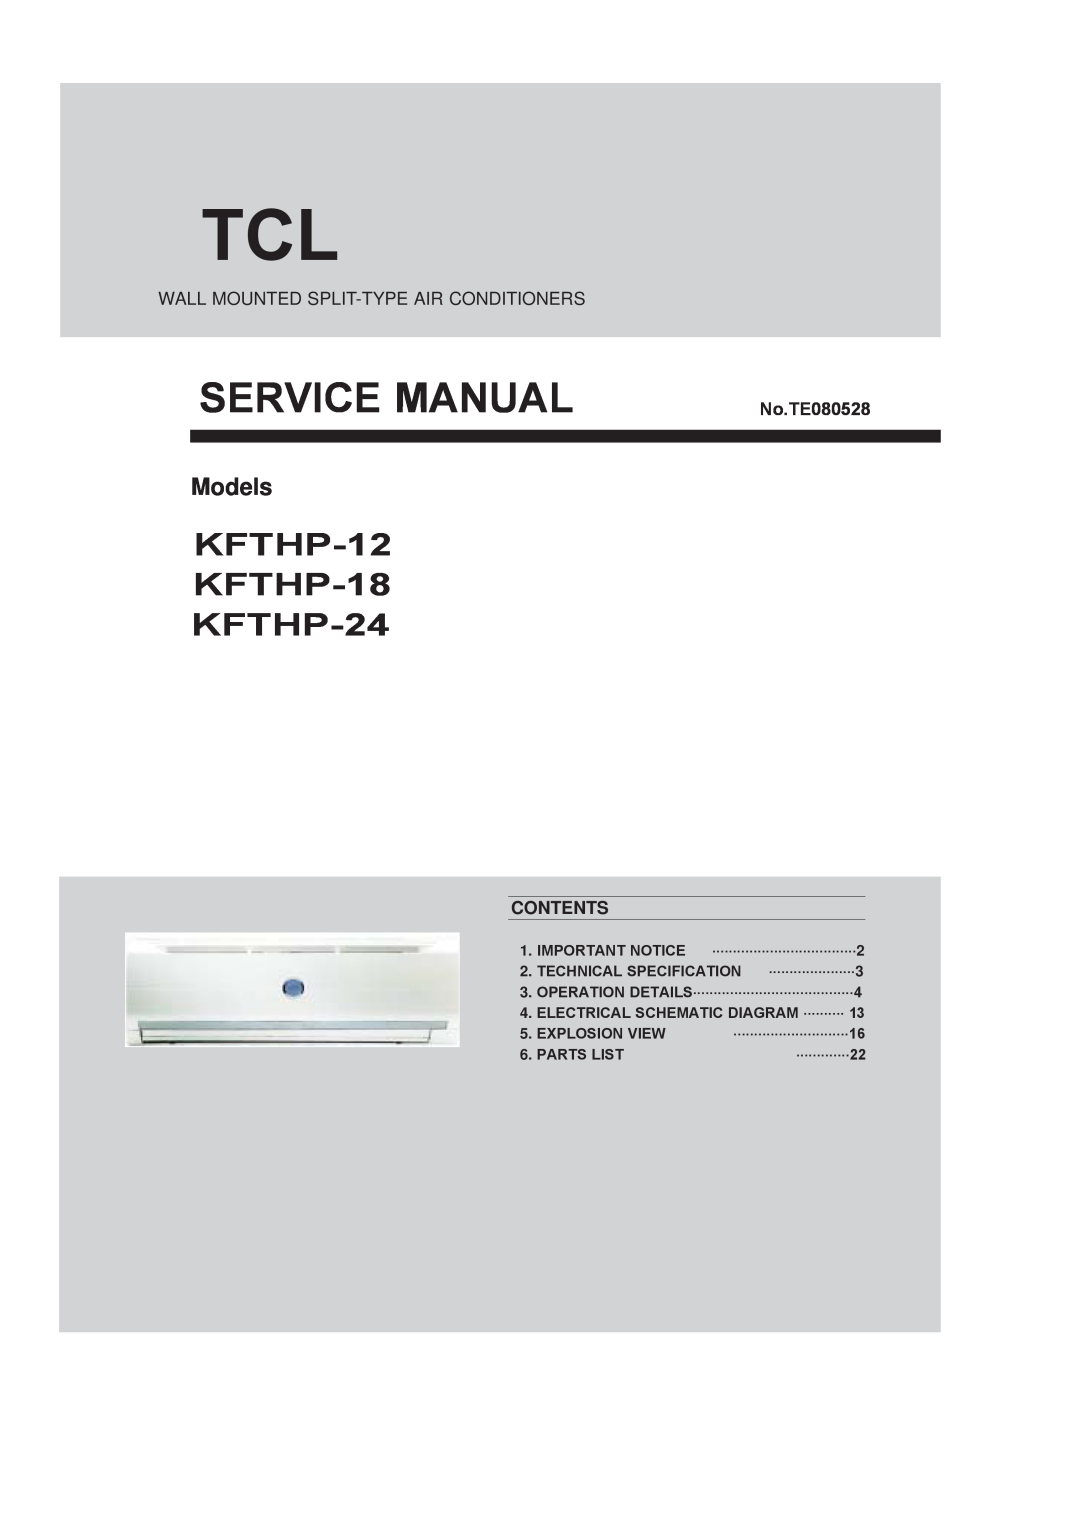 Soleus Air service manual Models, KFTHP-12 KFTHP-18 KFTHP-24, Wall Mounted Split-Typeair Conditioners, Contents 